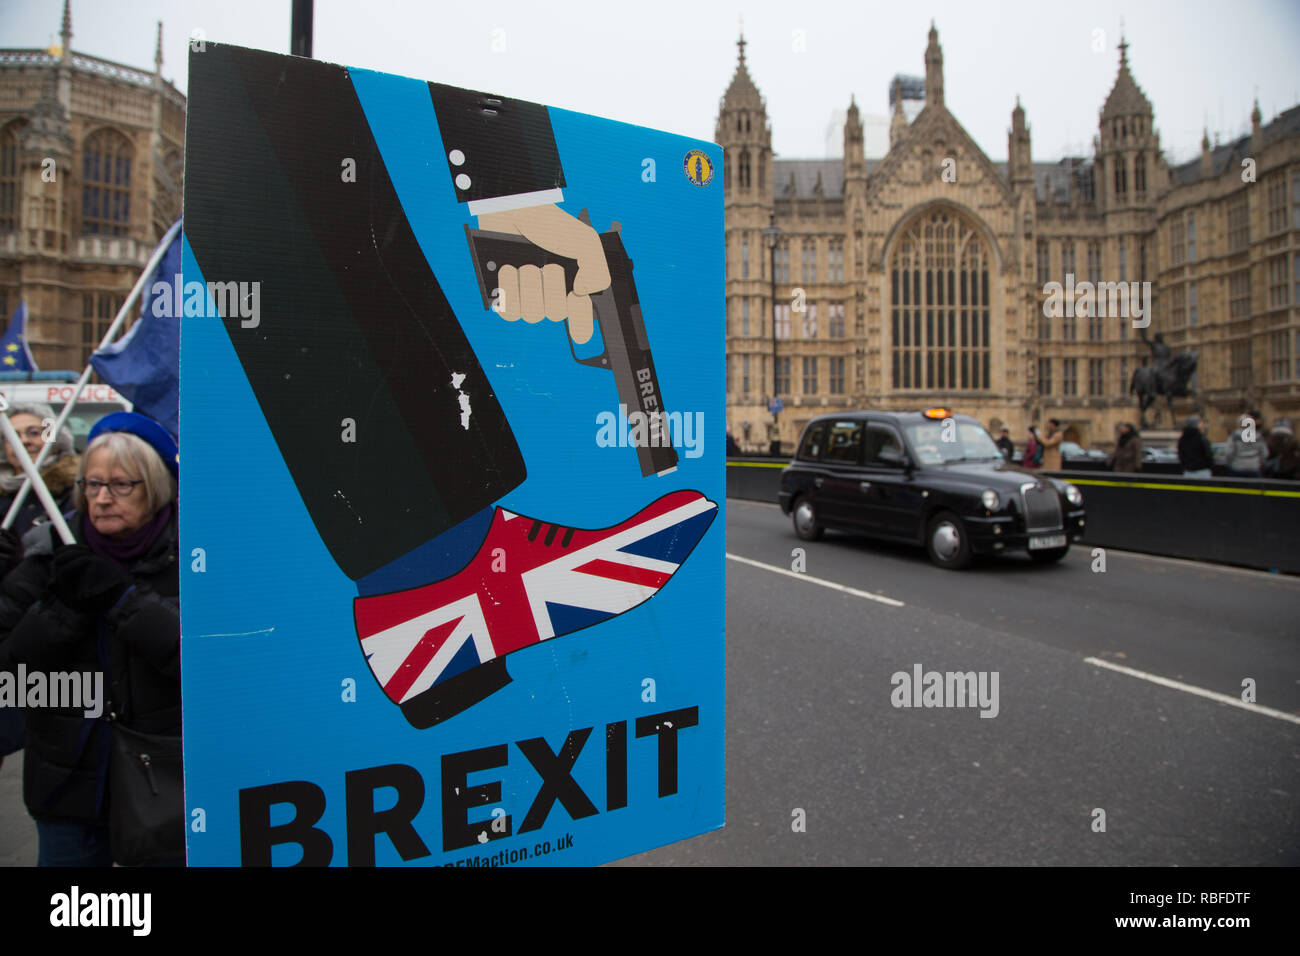 London, UK. 10th Jan 2019 : Anti-Brexit protesters demonstrate outside the Houses of Parliament in Westminster. Credit: Thabo Jaiyesimi/Alamy Live News Stock Photo